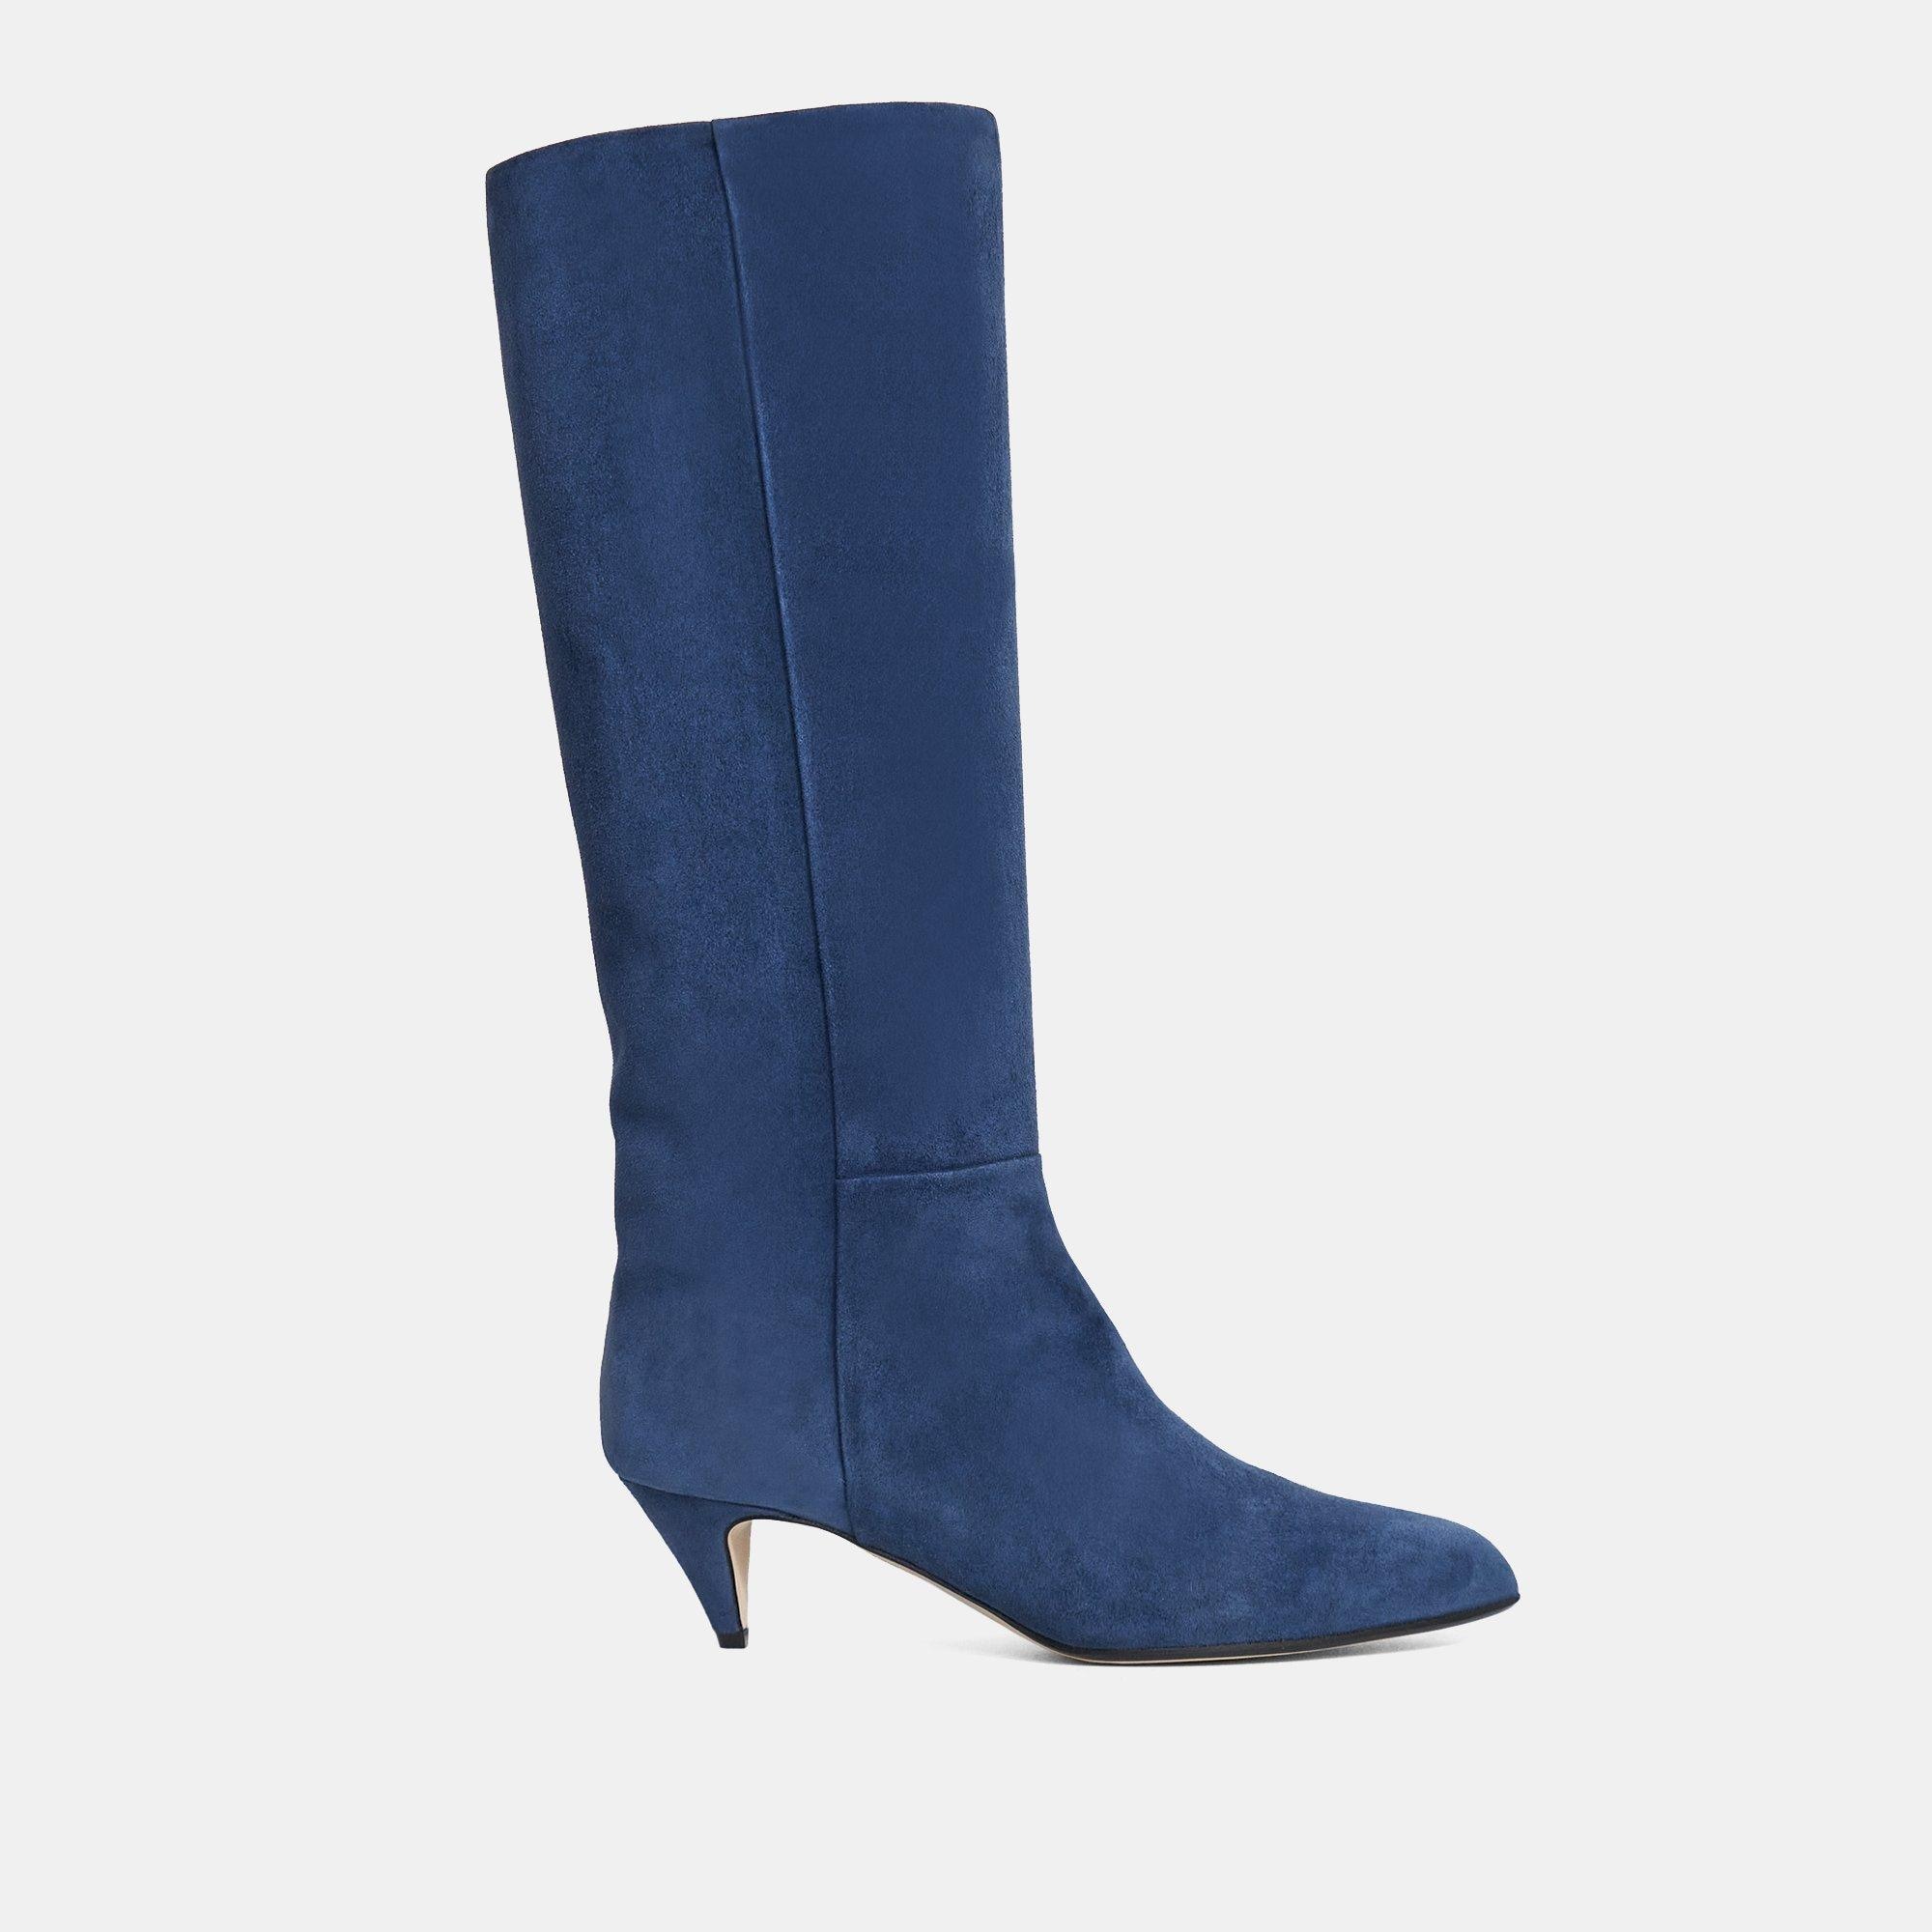 Theory Knee-High Boot in Waxed Suede